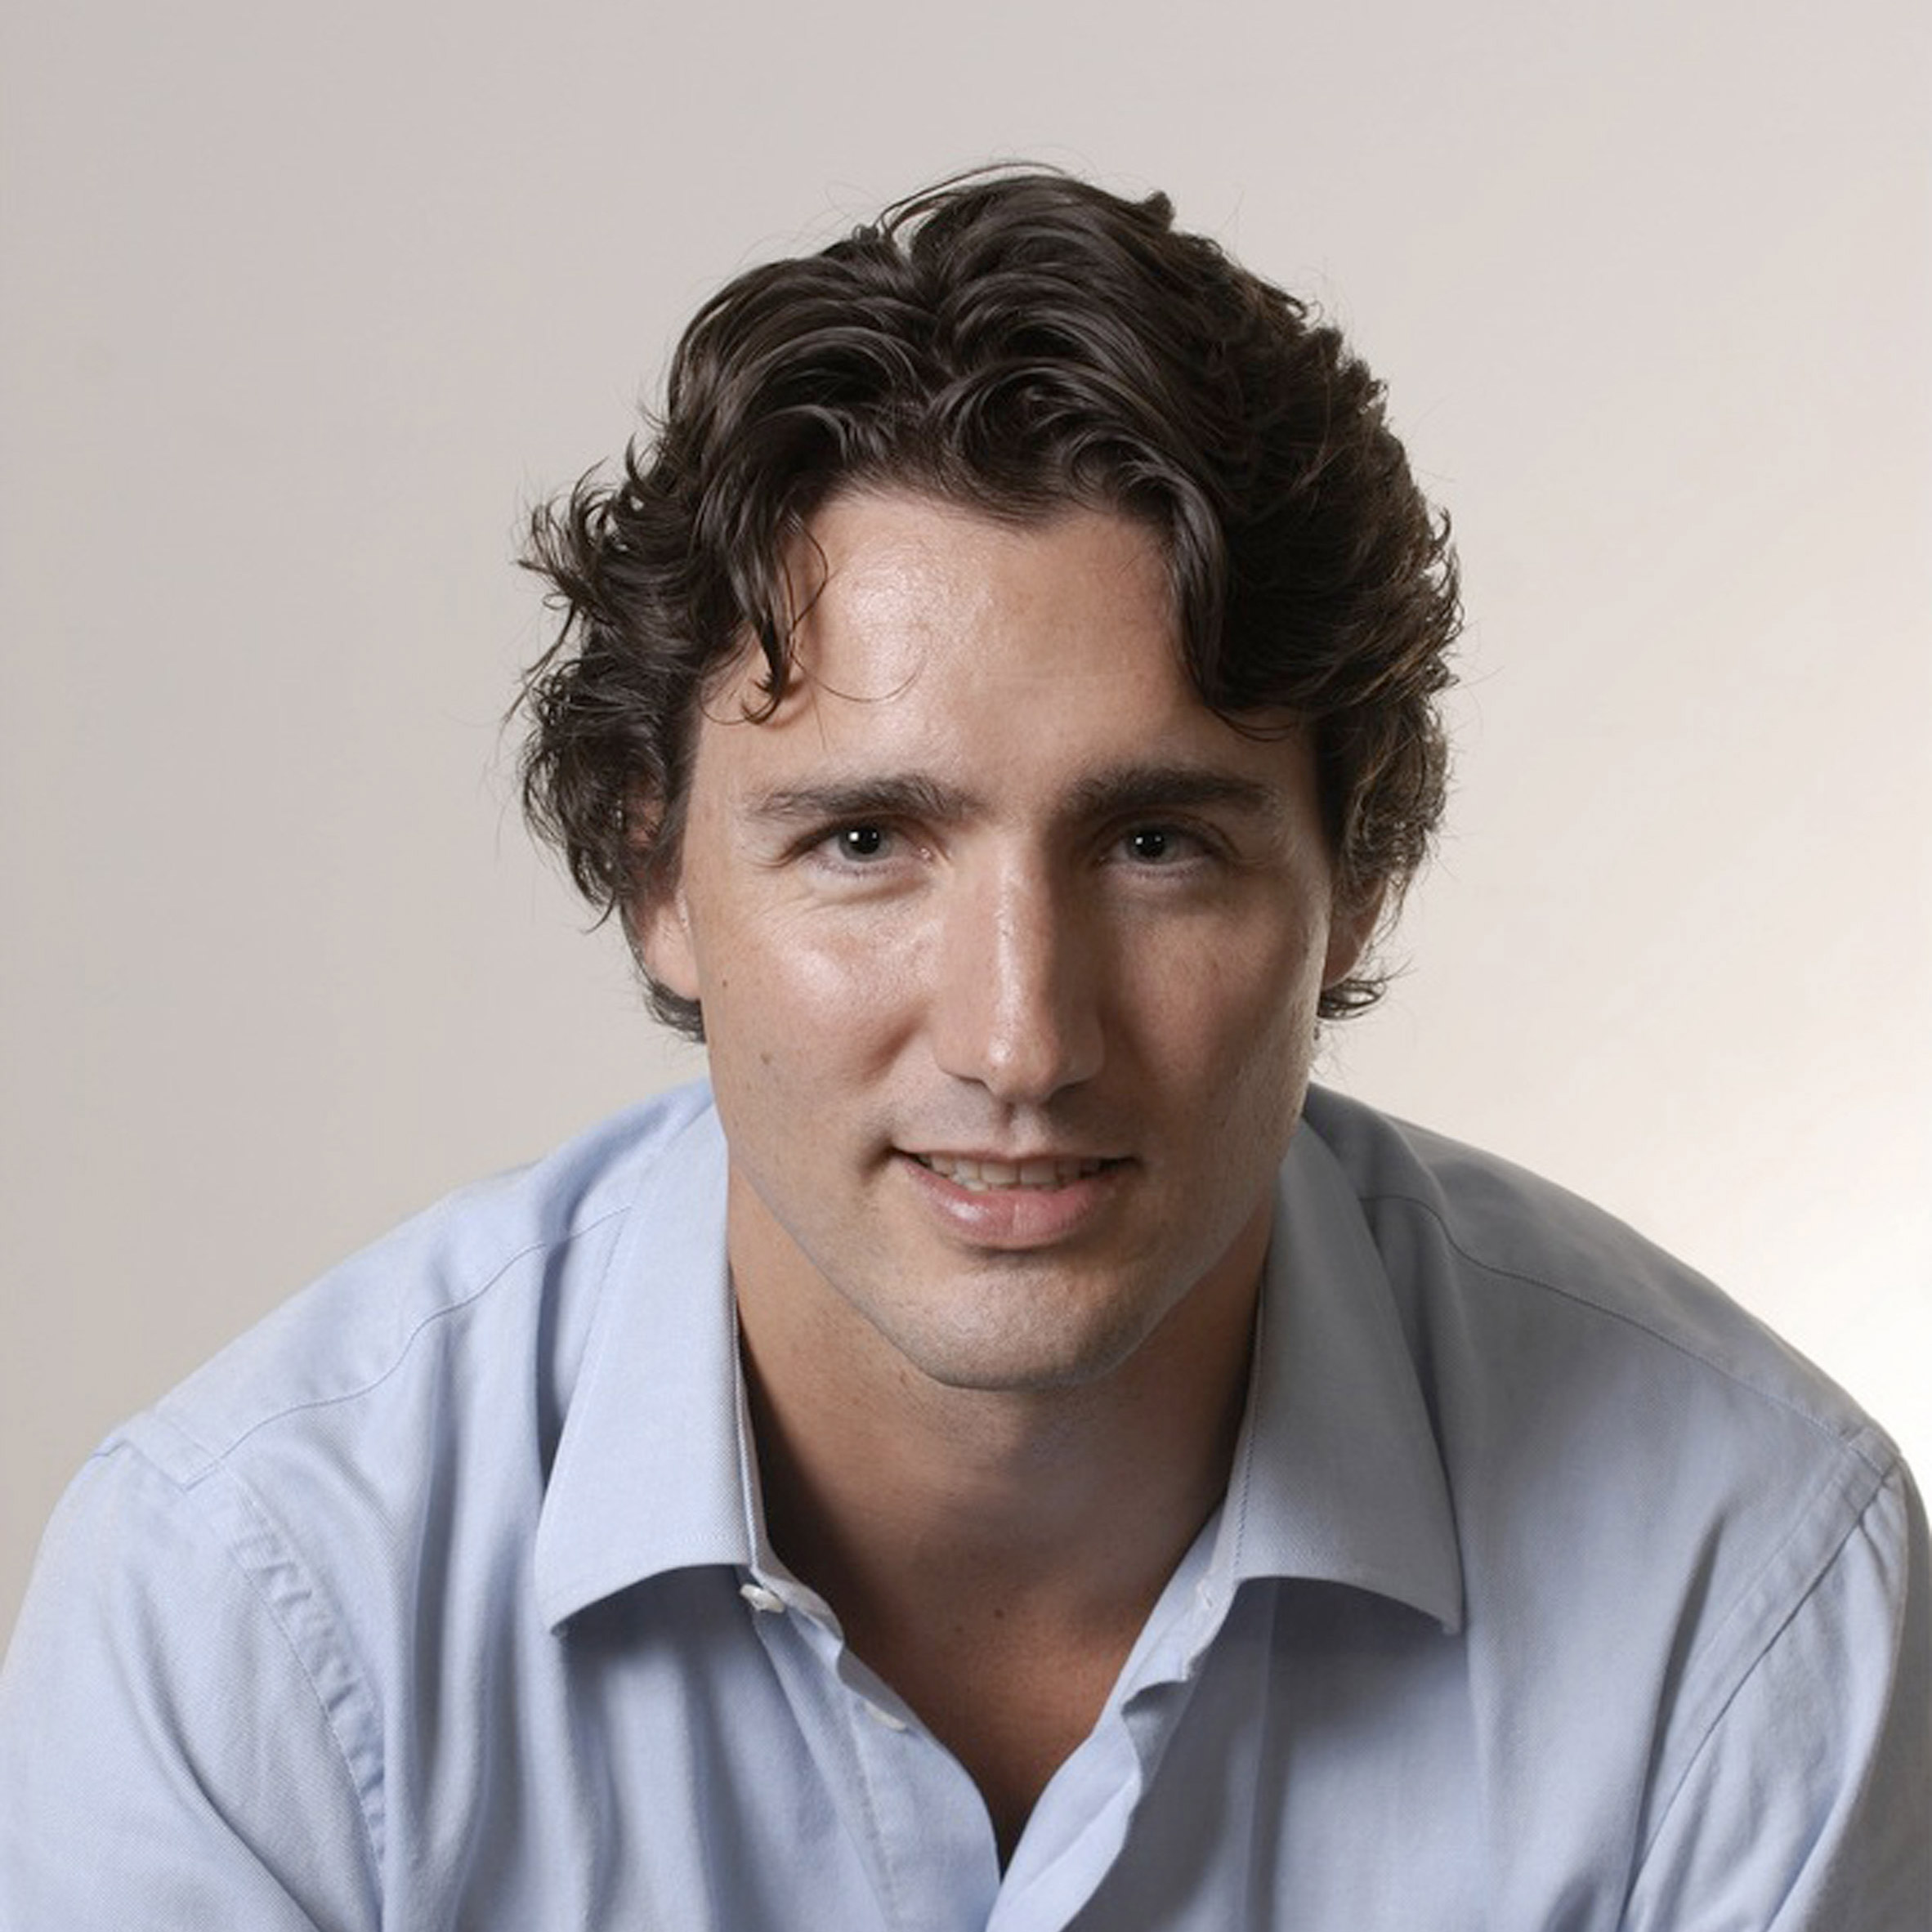 "Design and technology are changing the way we live" says Justin Trudeau